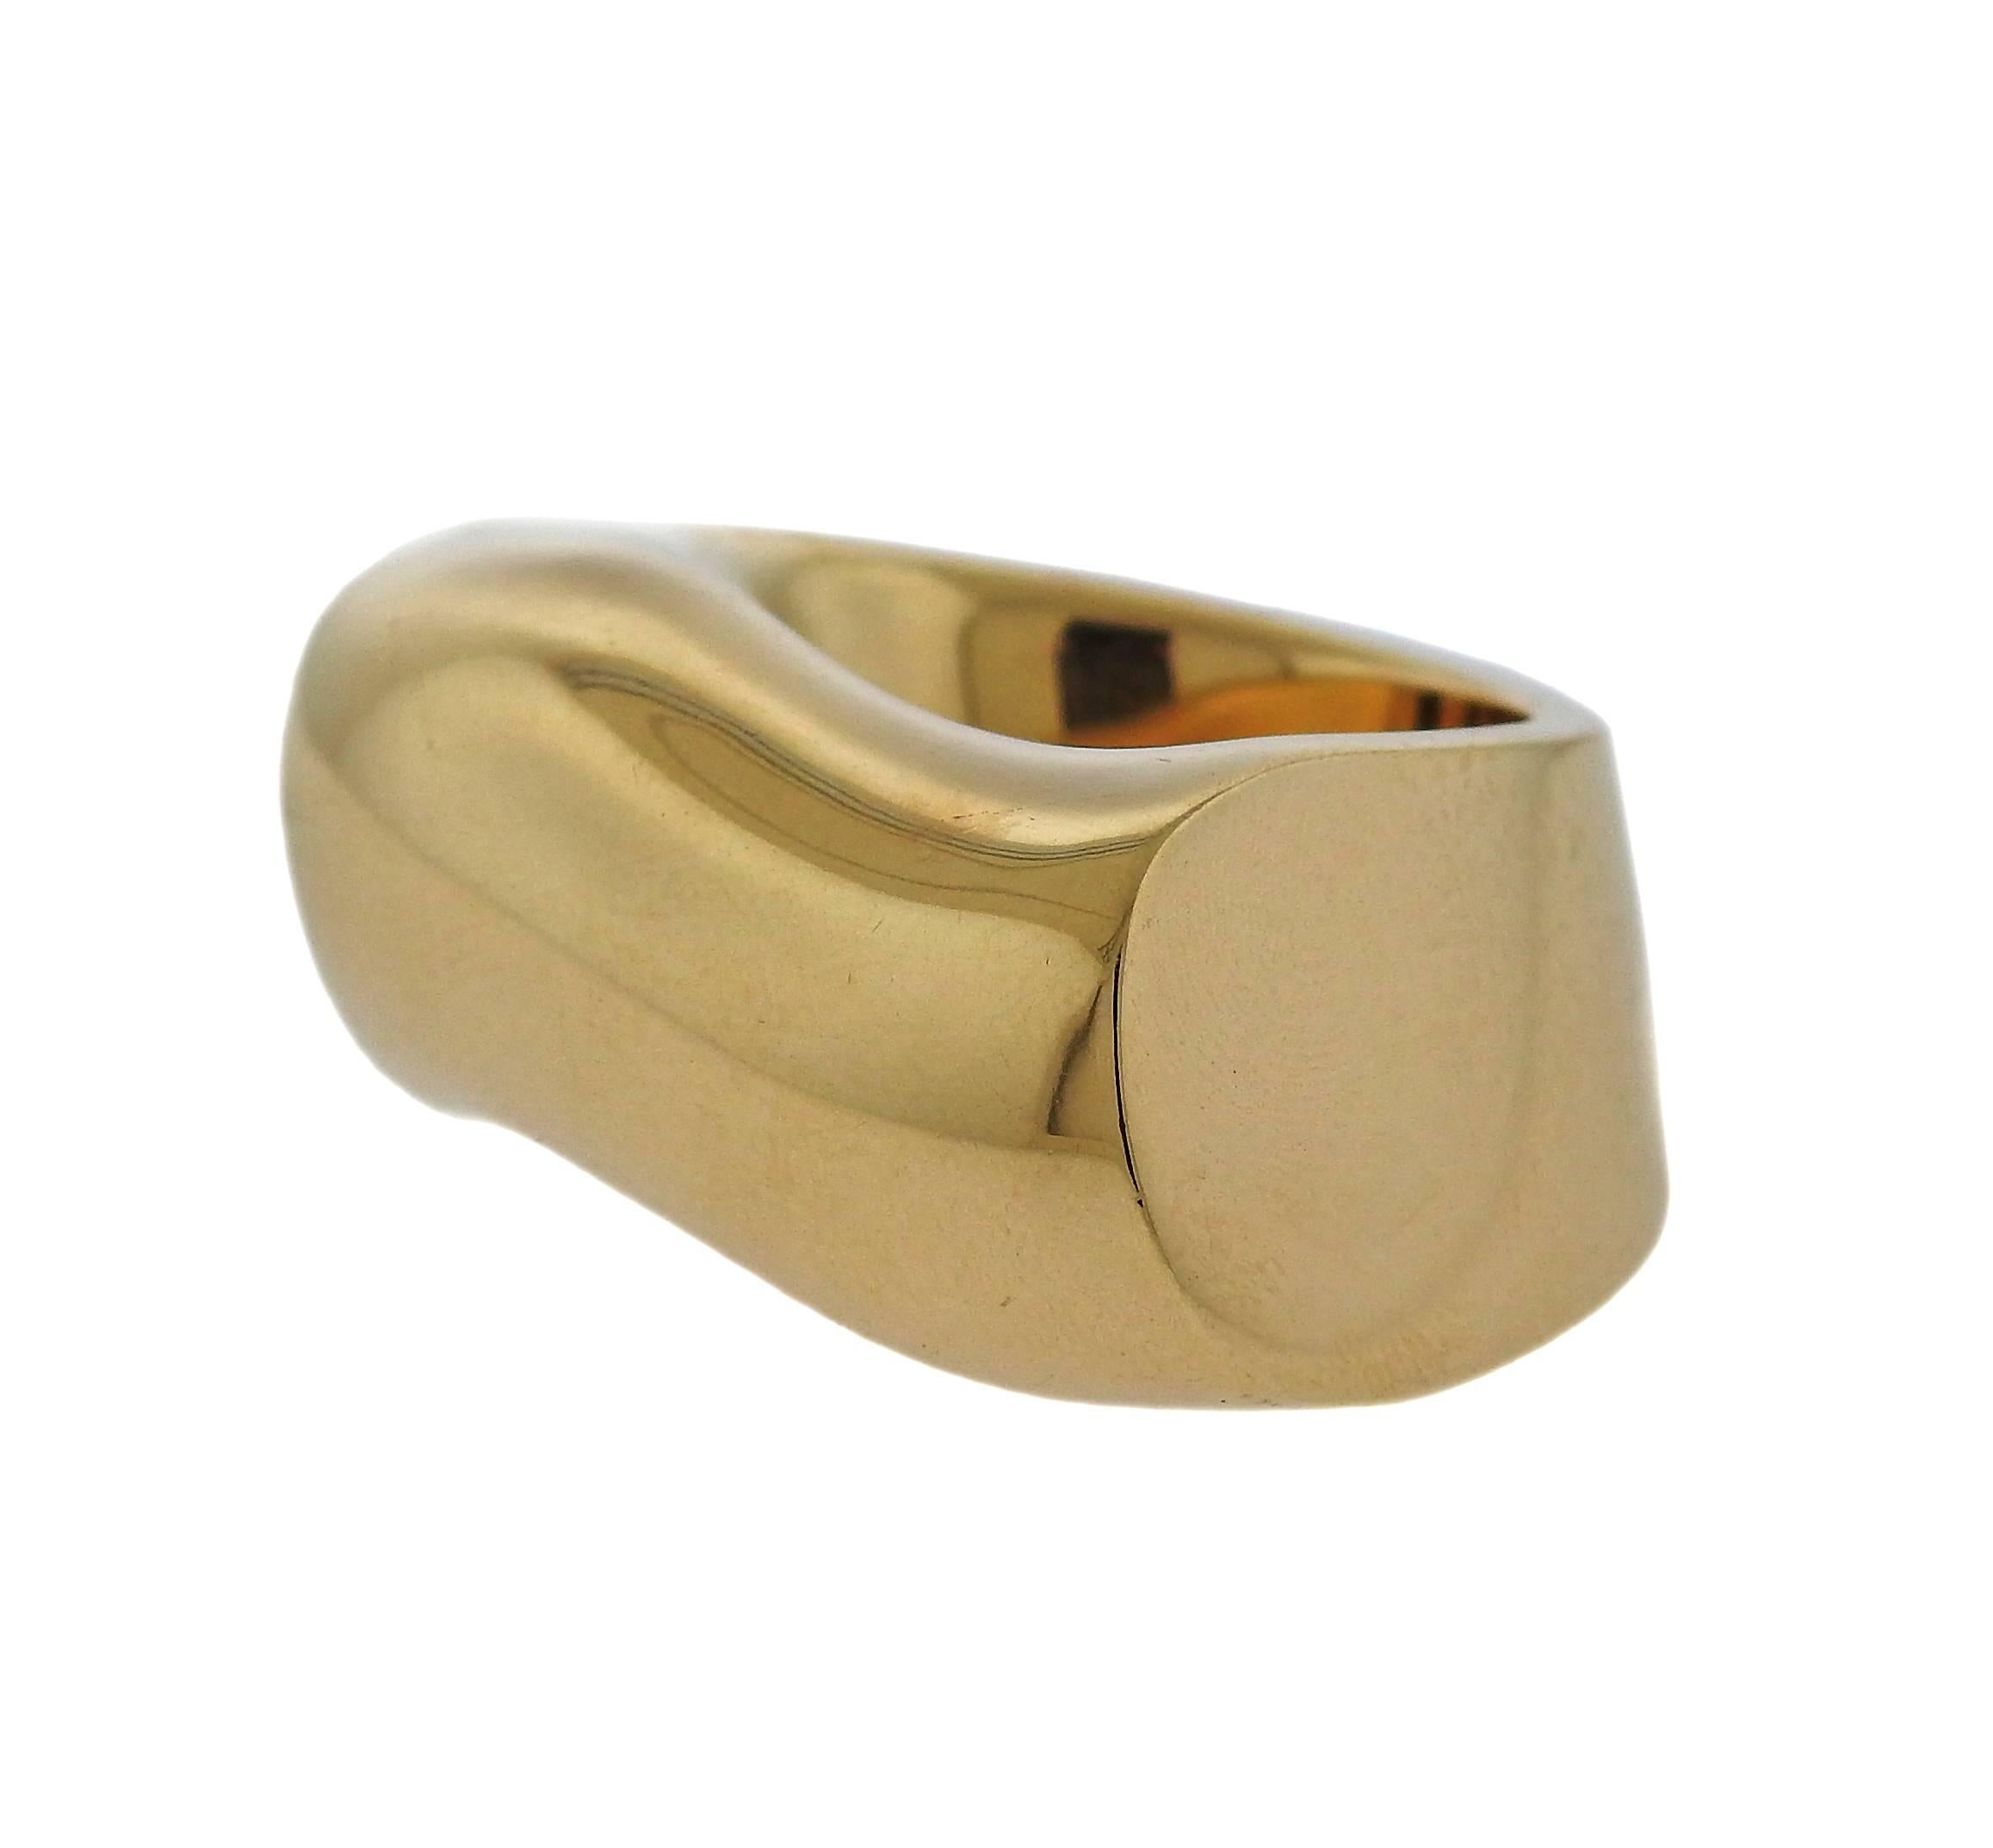 An 18k gold ring, crafted by Vhernier for Plateau collection. Ring is a size 5 3/4, ring top is 14mm x 26mm. Marked: Vhenier, 750, 24B. Weight - 28.2 grams 